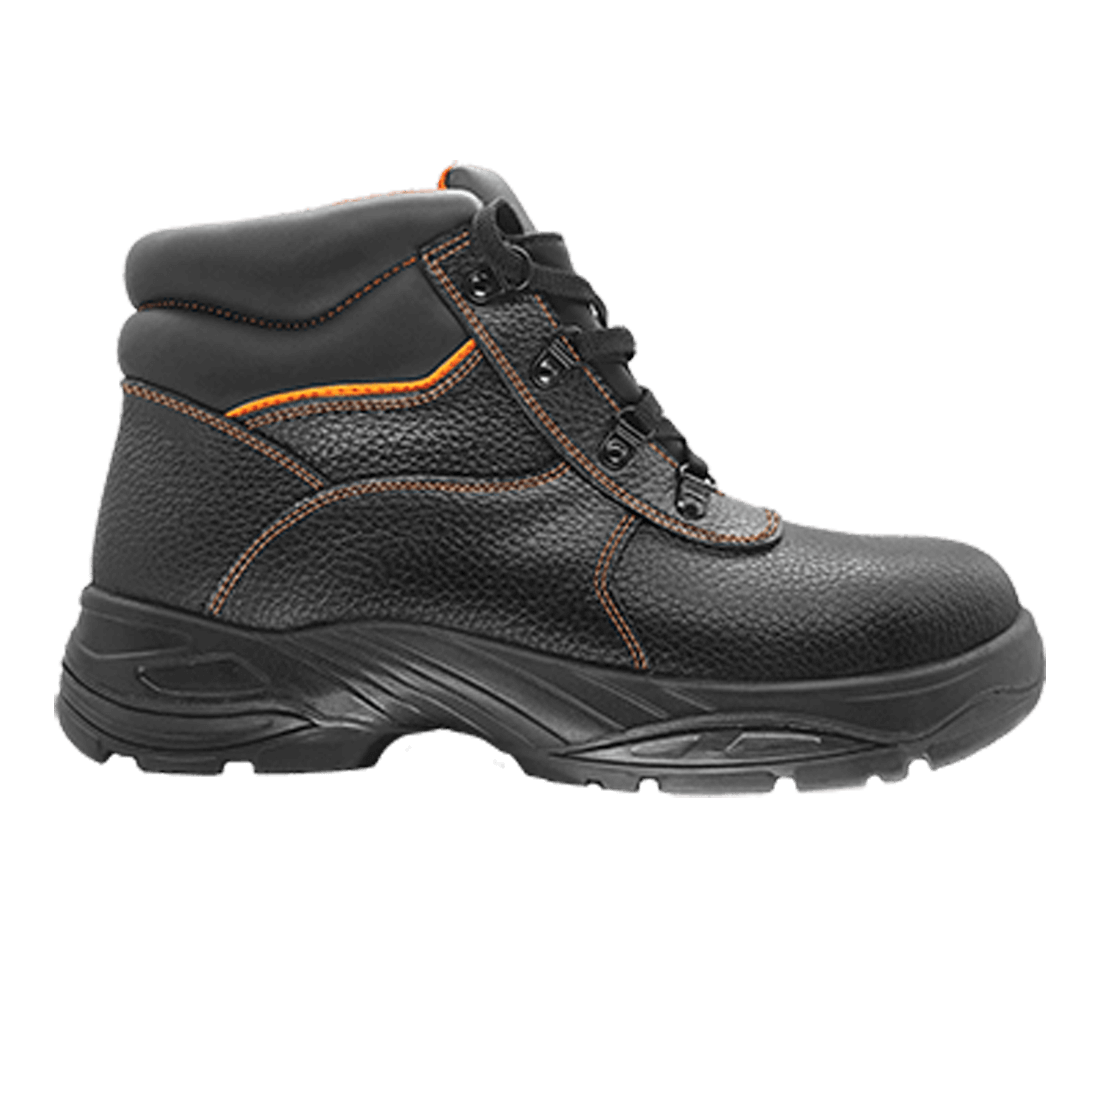 Sir System Safety FAST SHOE | BSF OVERCAP NEW